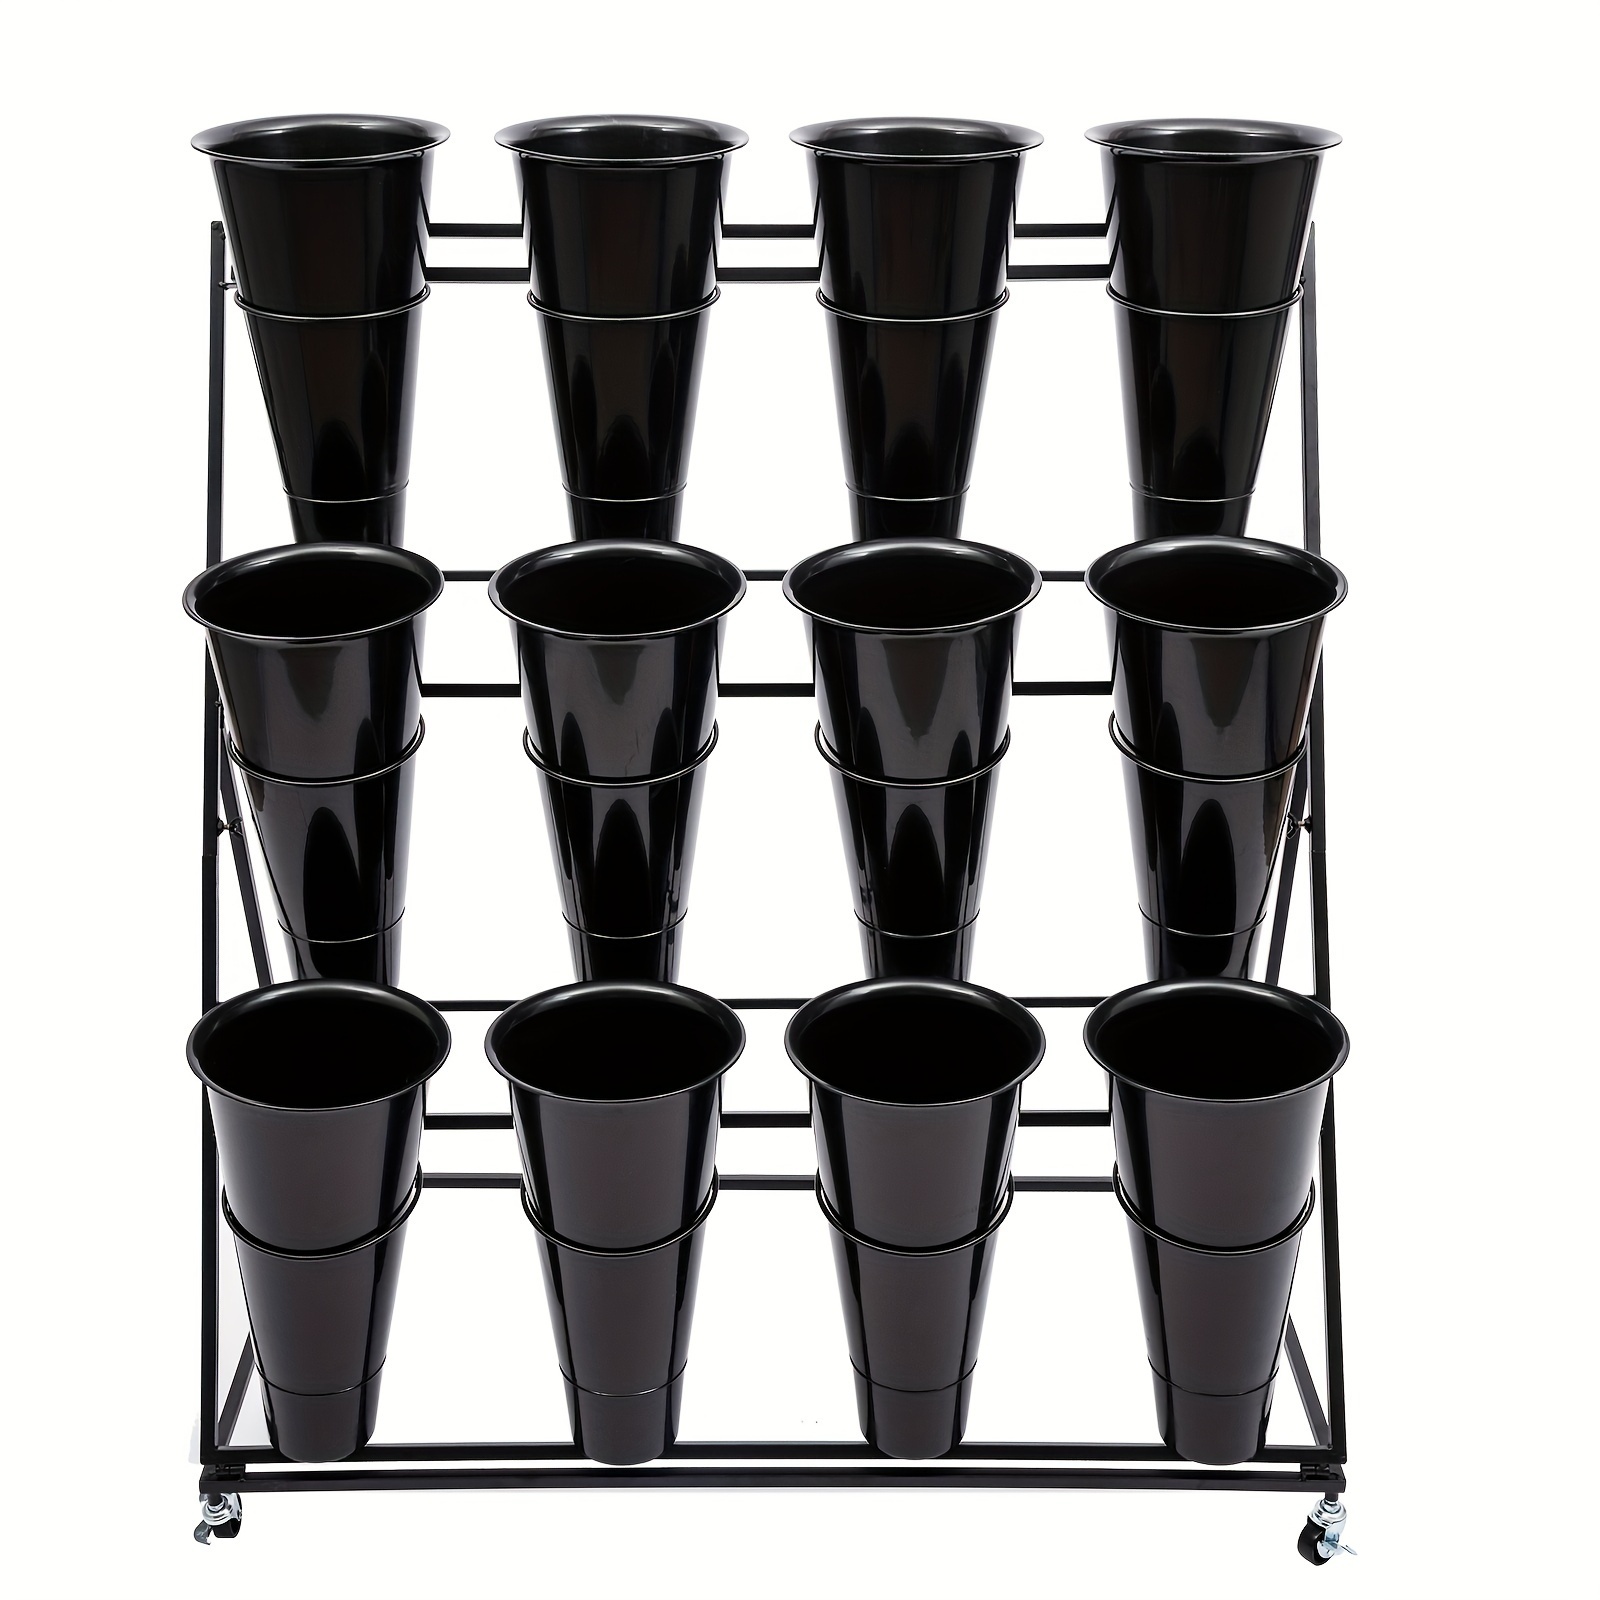 

Elegant 3-tier Flower Display Stand With 12 Buckets - Durable Iron And Plastic For Florists And Home Gardens, 100cm Tall Garden Post Fence, Pole Garden, Outdoors Floors